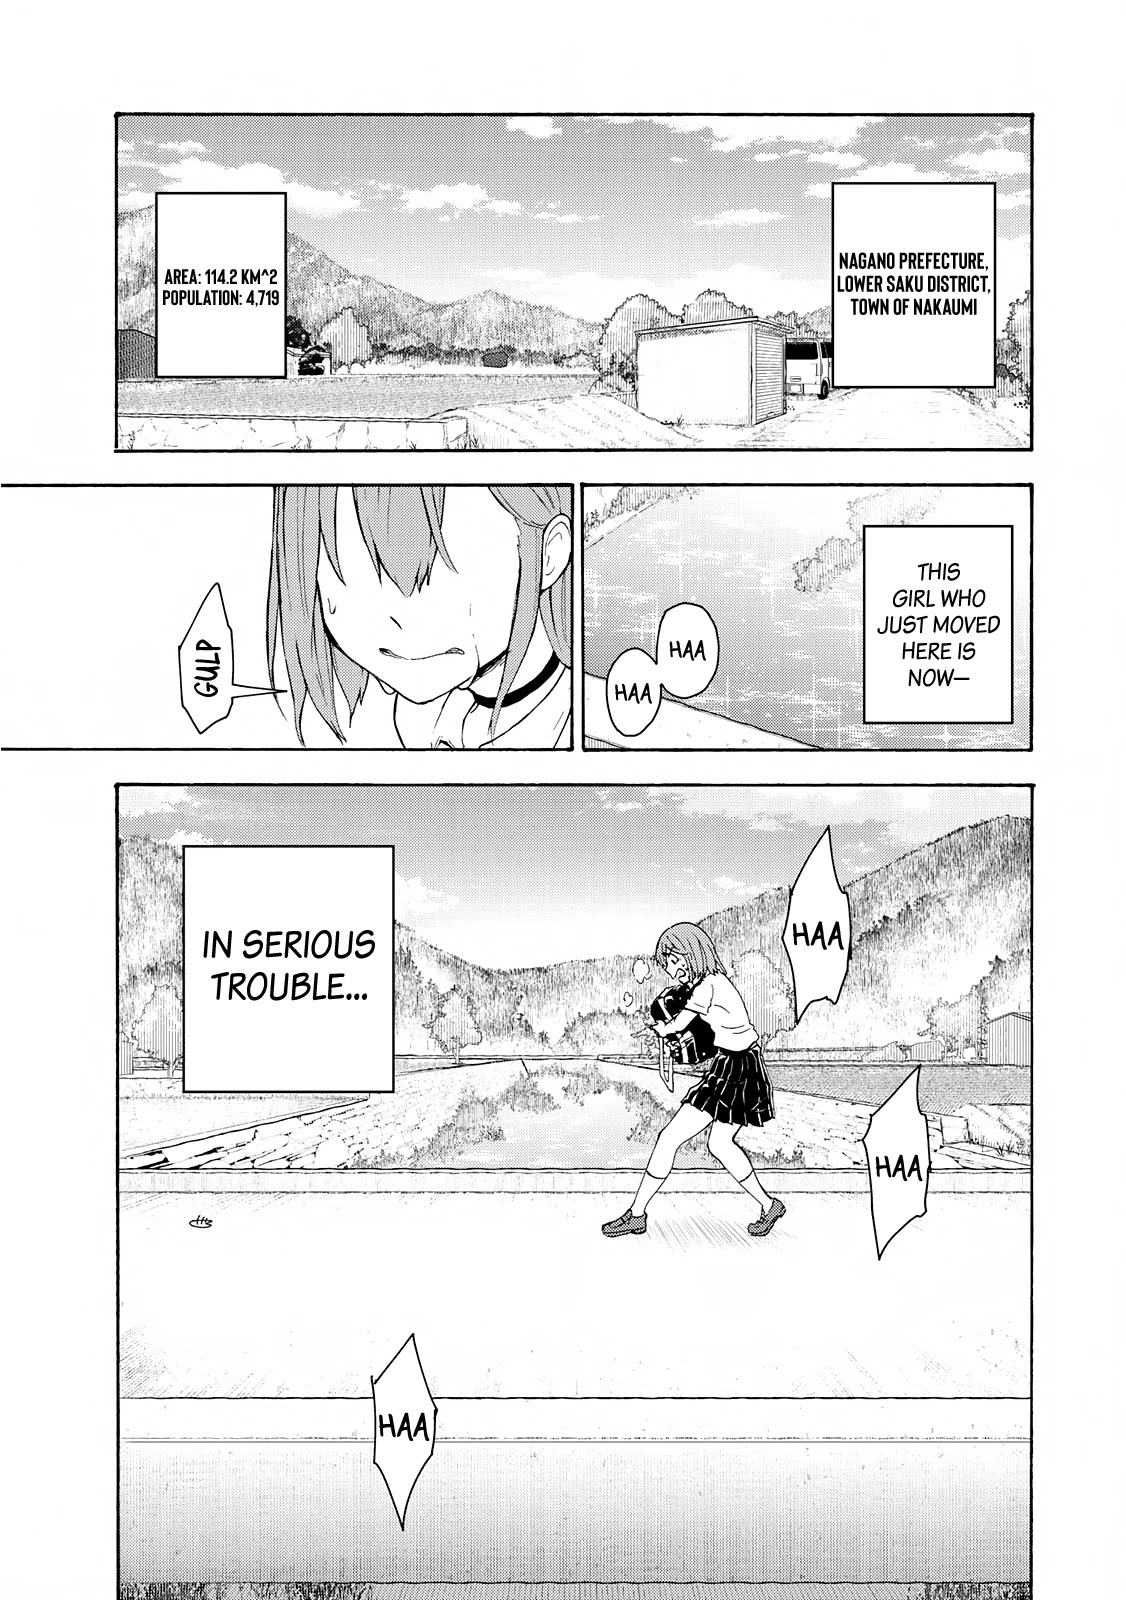 Hiyumi's Country Road Chapter 3 #1